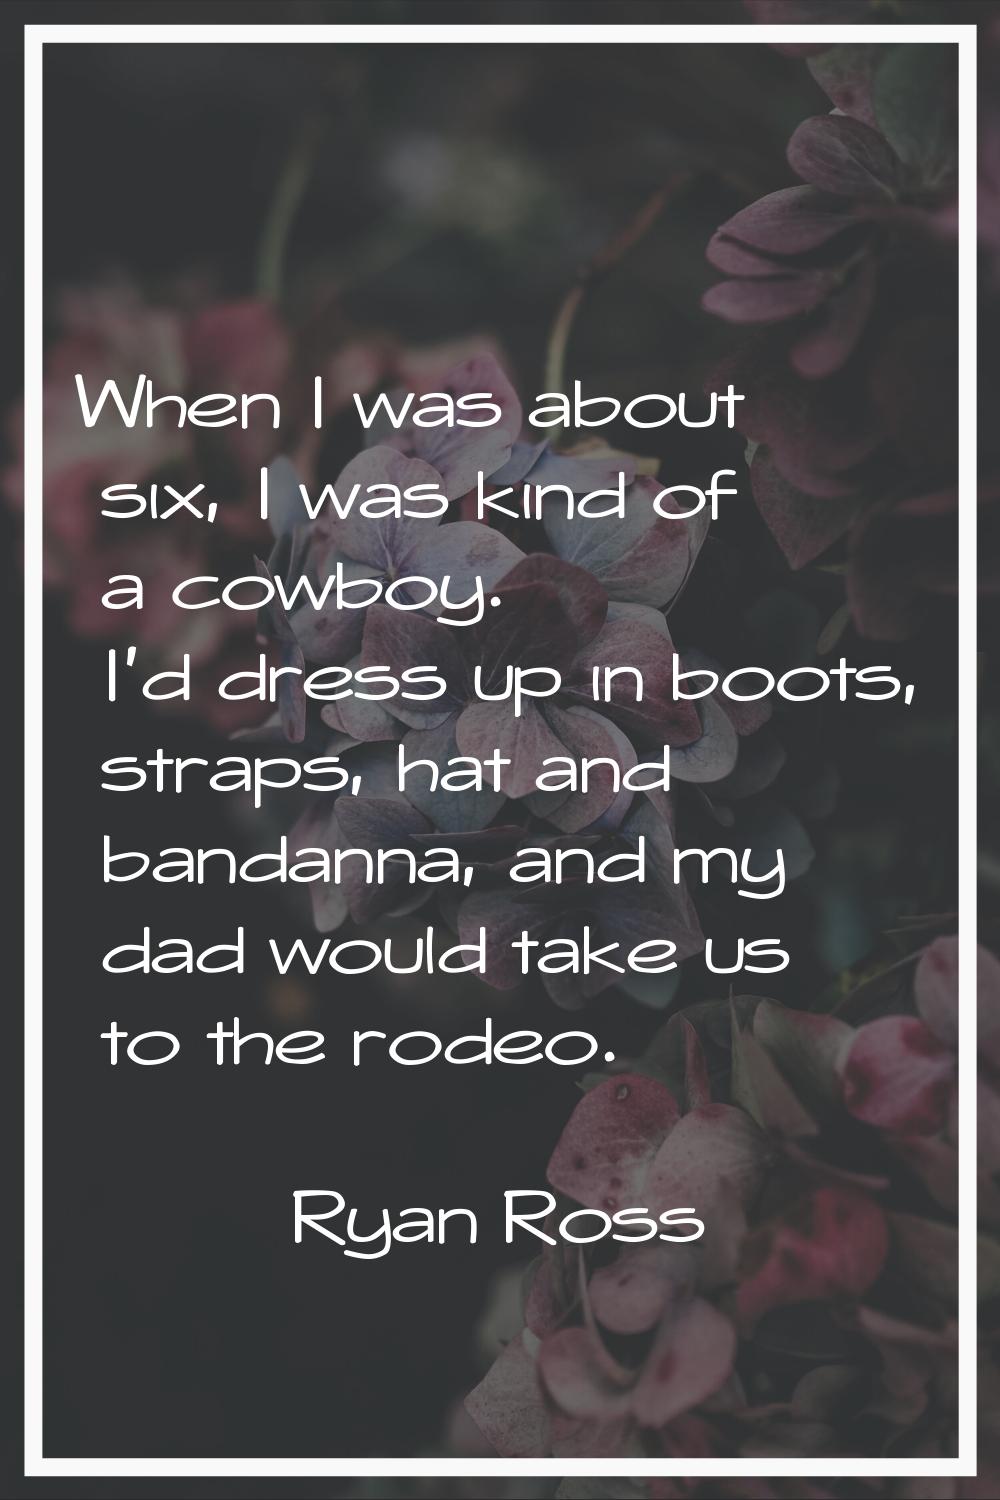 When I was about six, I was kind of a cowboy. I'd dress up in boots, straps, hat and bandanna, and 